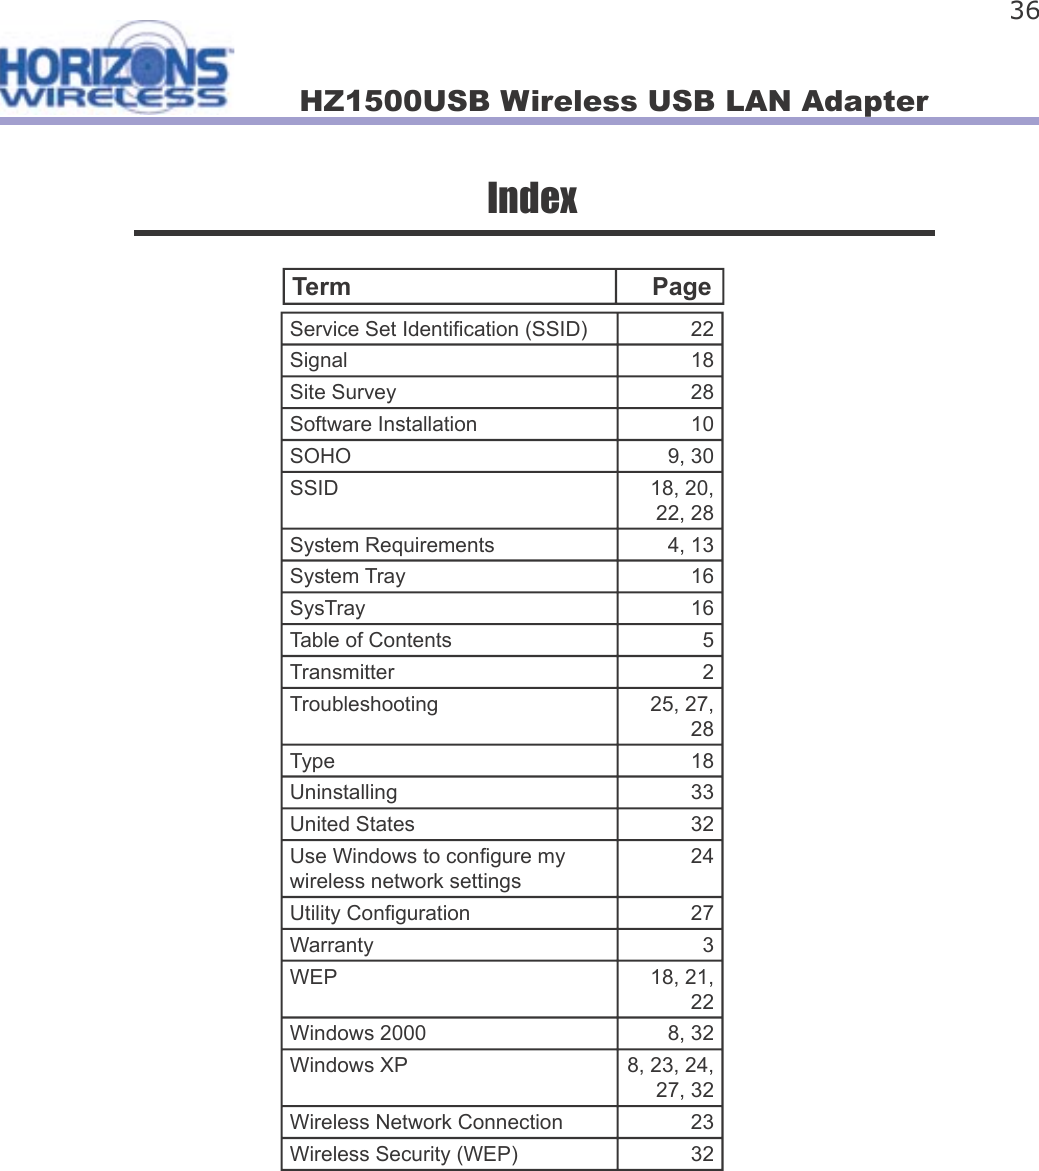 HZ1500USB Wireless USB LAN Adapter 36IndexService Set Identi cation (SSID) 22Signal 18Site Survey 28Software Installation 10SOHO 9, 30SSID 18, 20, 22, 28System Requirements 4, 13System Tray 16SysTray 16Table of Contents 5Transmitter 2Troubleshooting 25, 27, 28Type 18Uninstalling 33United States 32Use Windows to con gure my wireless network settings24Utility Con guration 27Warranty 3WEP 18, 21, 22Windows 2000 8, 32Windows XP 8, 23, 24, 27, 32Wireless Network Connection 23Wireless Security (WEP) 32Term     Page